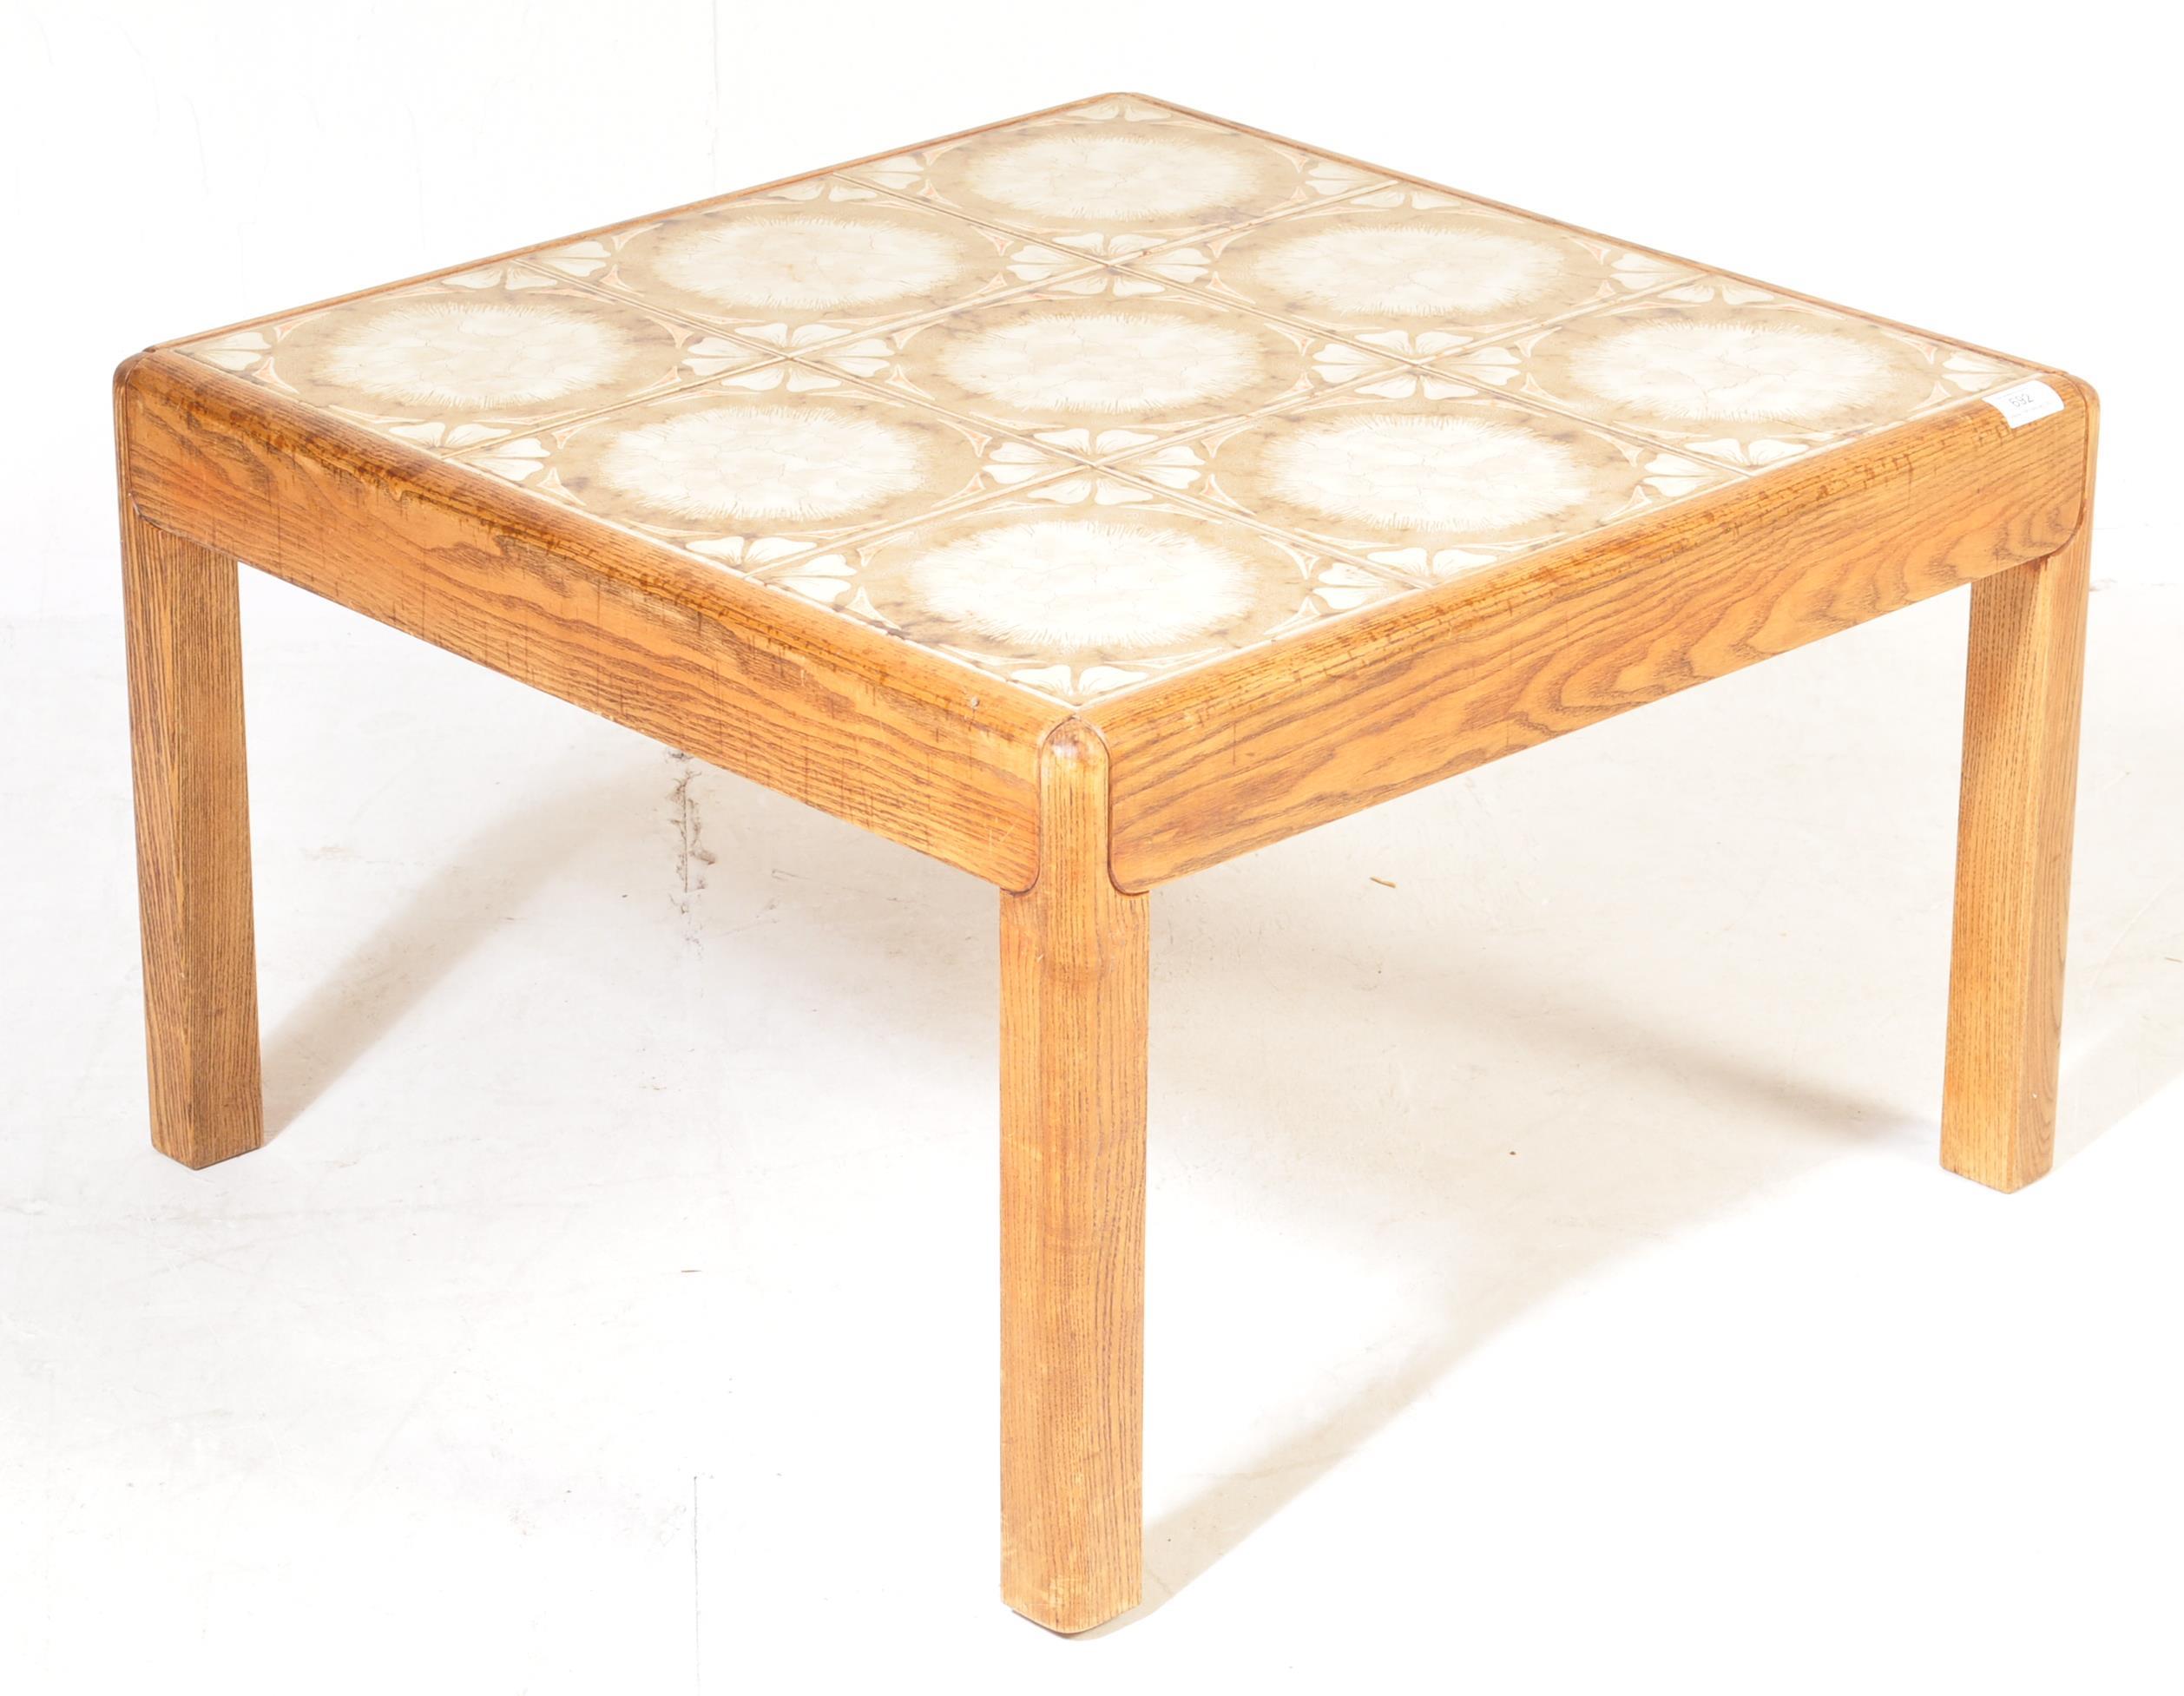 G - PLAN - RETRO VINTAGE MID 20TH CENTURY TILE TOP COFFEE TABLE - Image 2 of 6